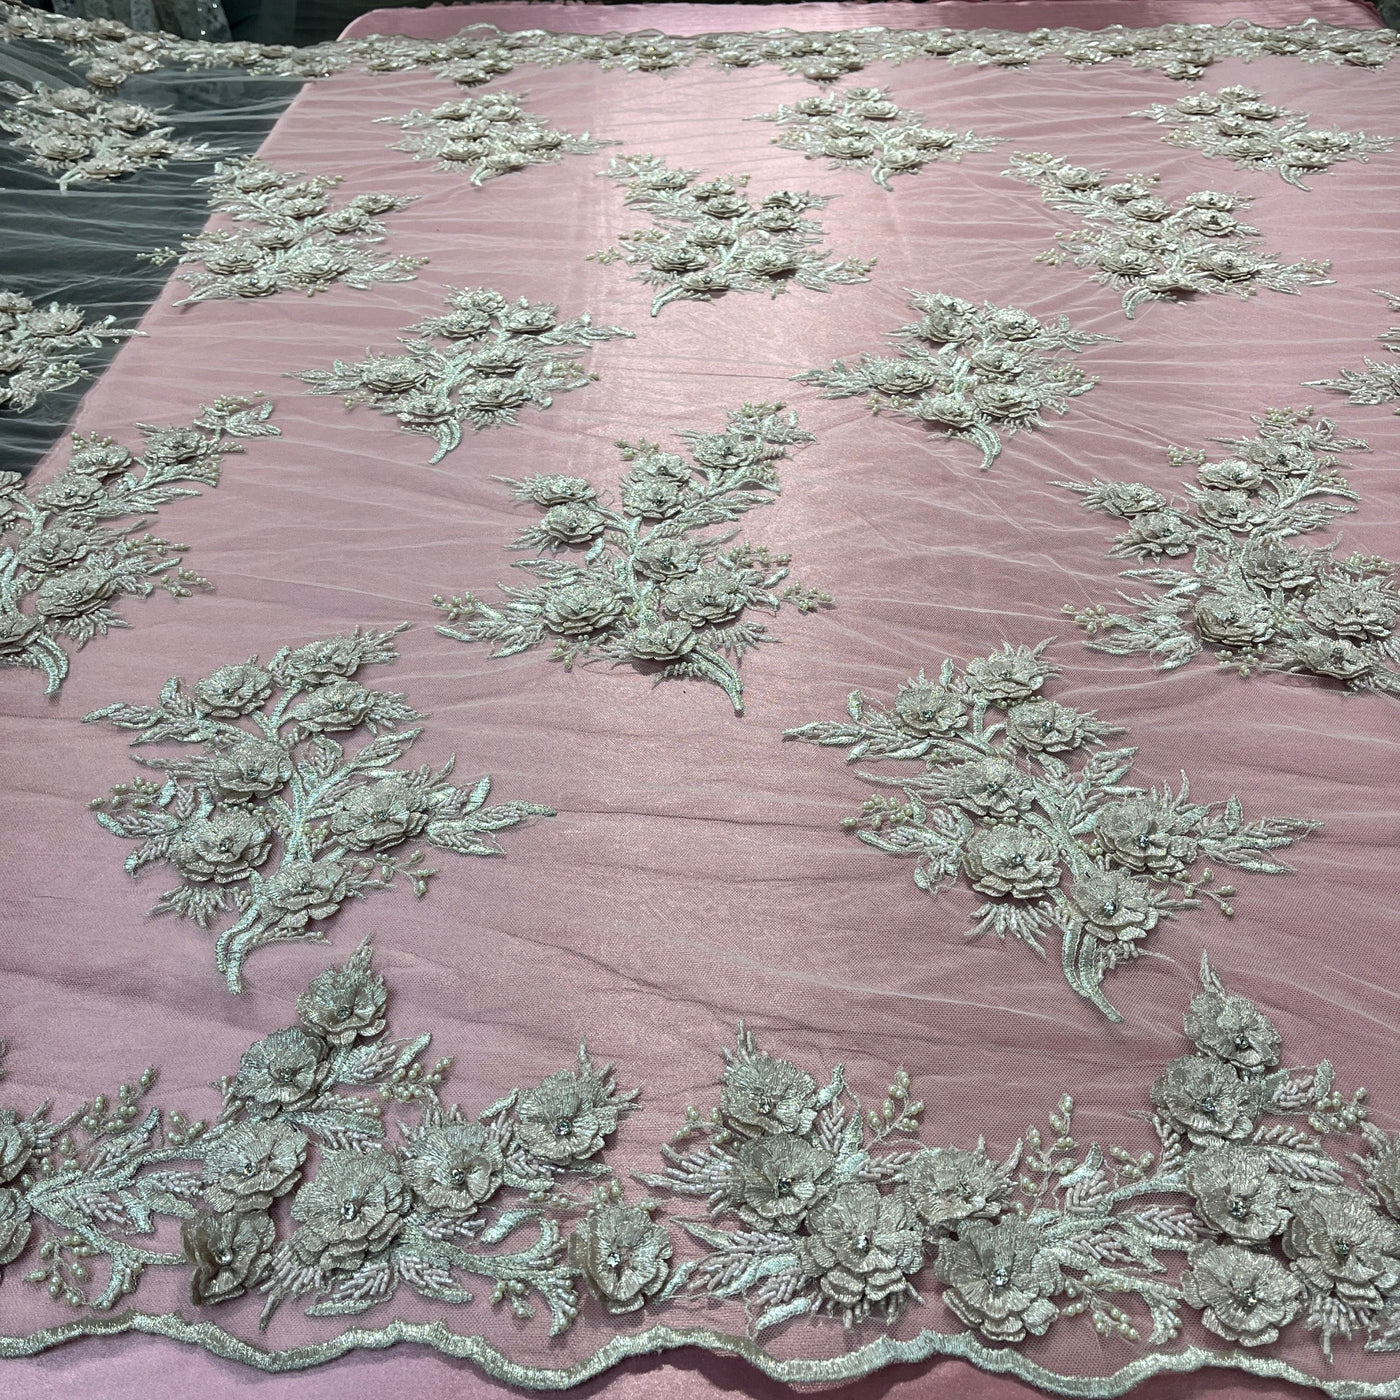 Beaded 3D Floral Lace Fabric Embroidered on 100% Polyester Net Mesh | Lace USA - GD-265